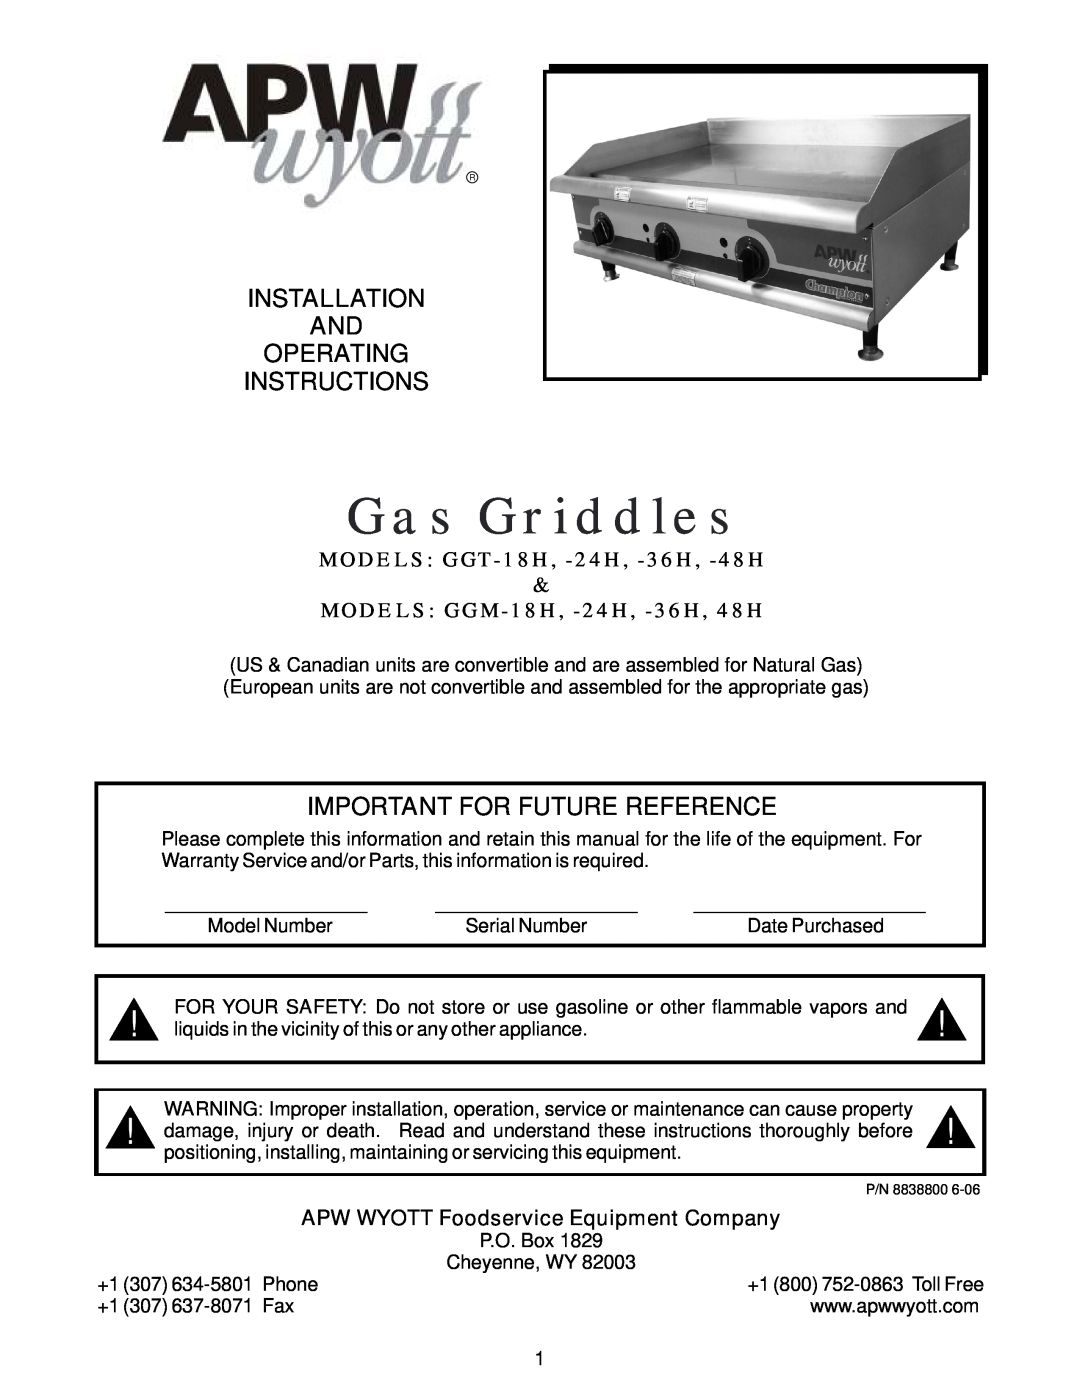 APW Wyott GGM-36H, GGT-36H warranty Installation And Operating Instructions, Important For Future Reference, Gas Griddles 